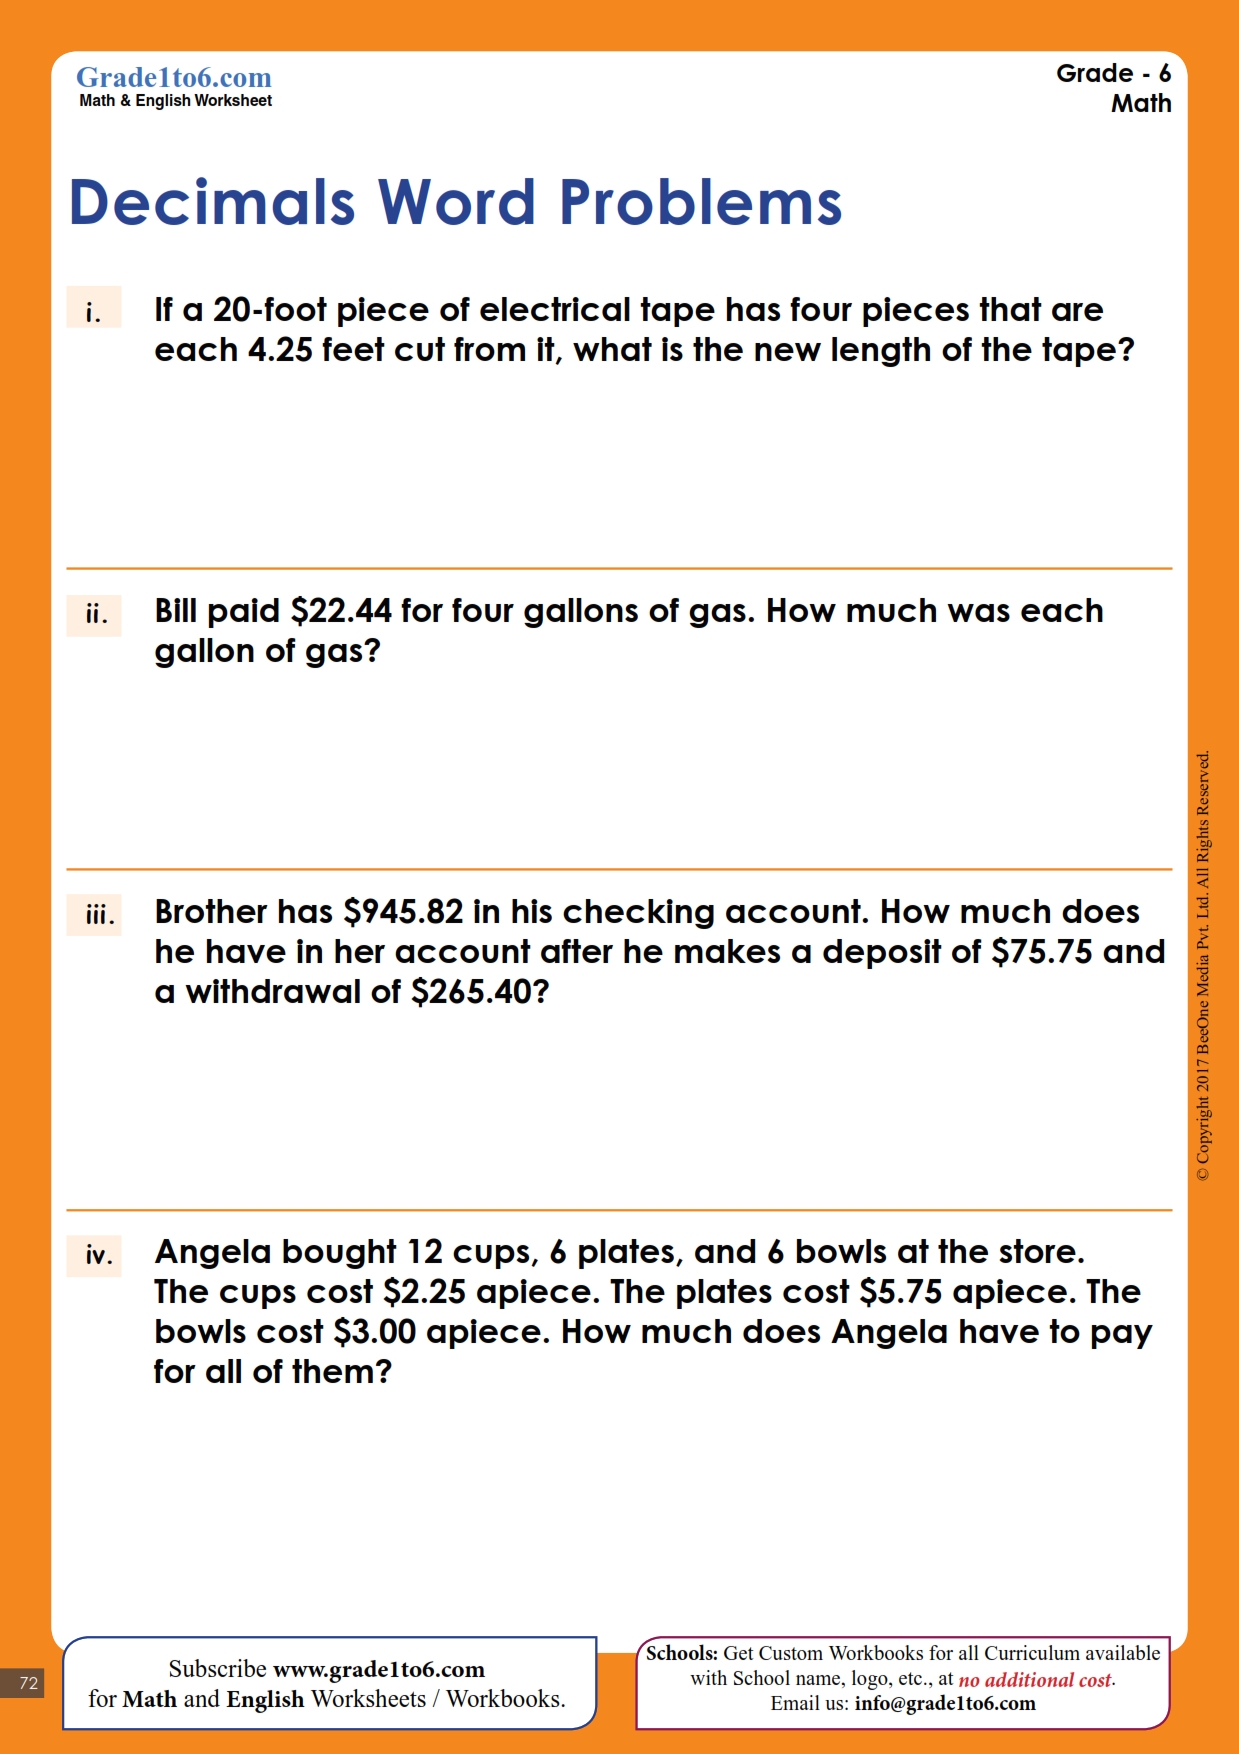 solve word problems using decimal operations